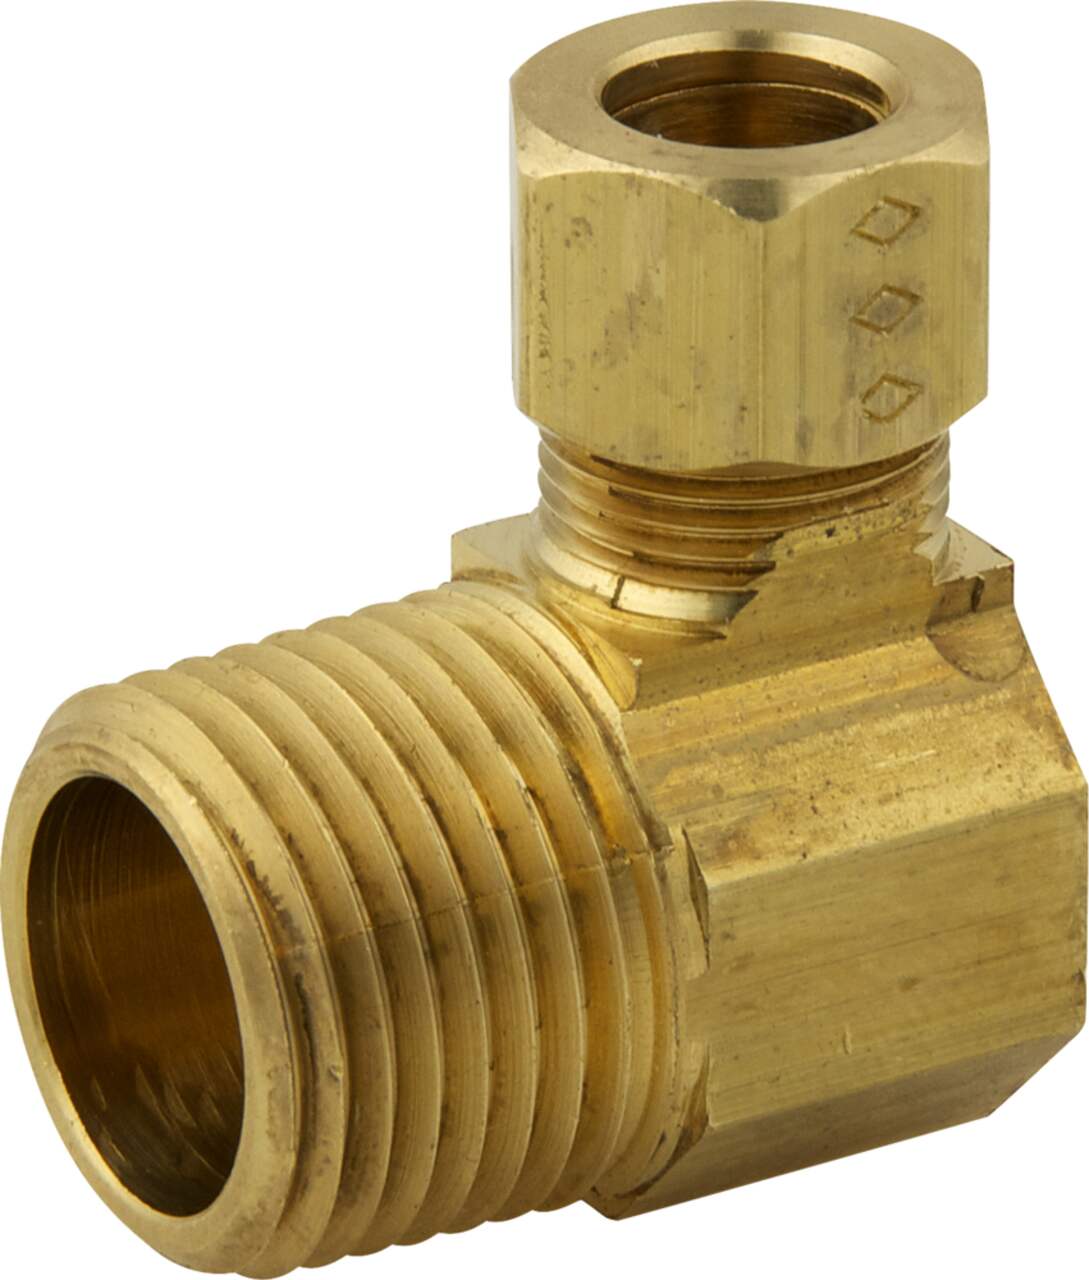 Compression Fitting, Elbow, 90 Degree, Lead-Free Brass, 5/8